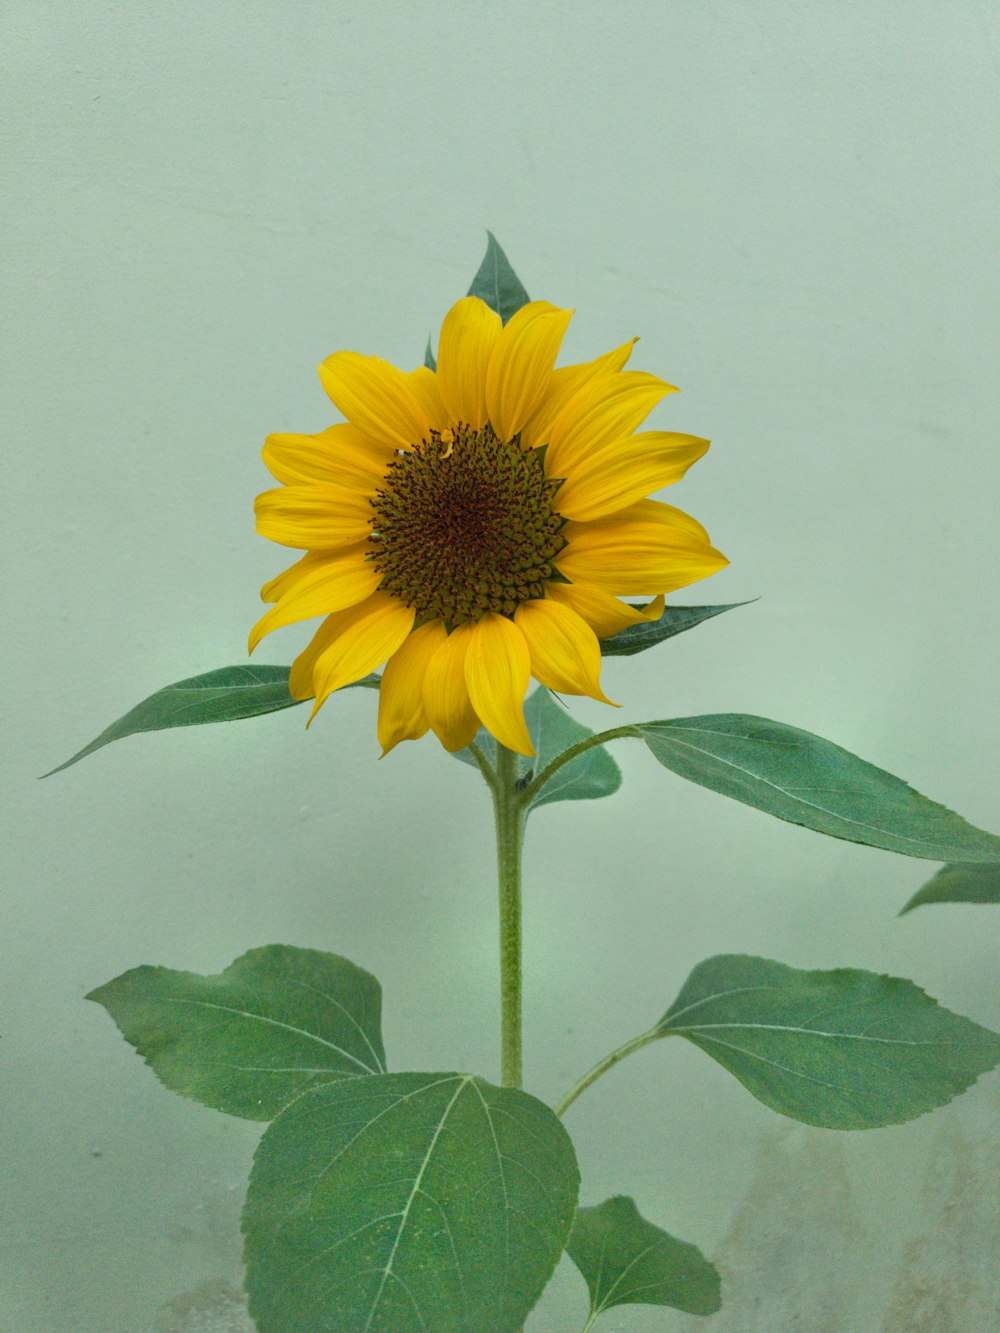 a yellow sunflower with green leaves in a vase